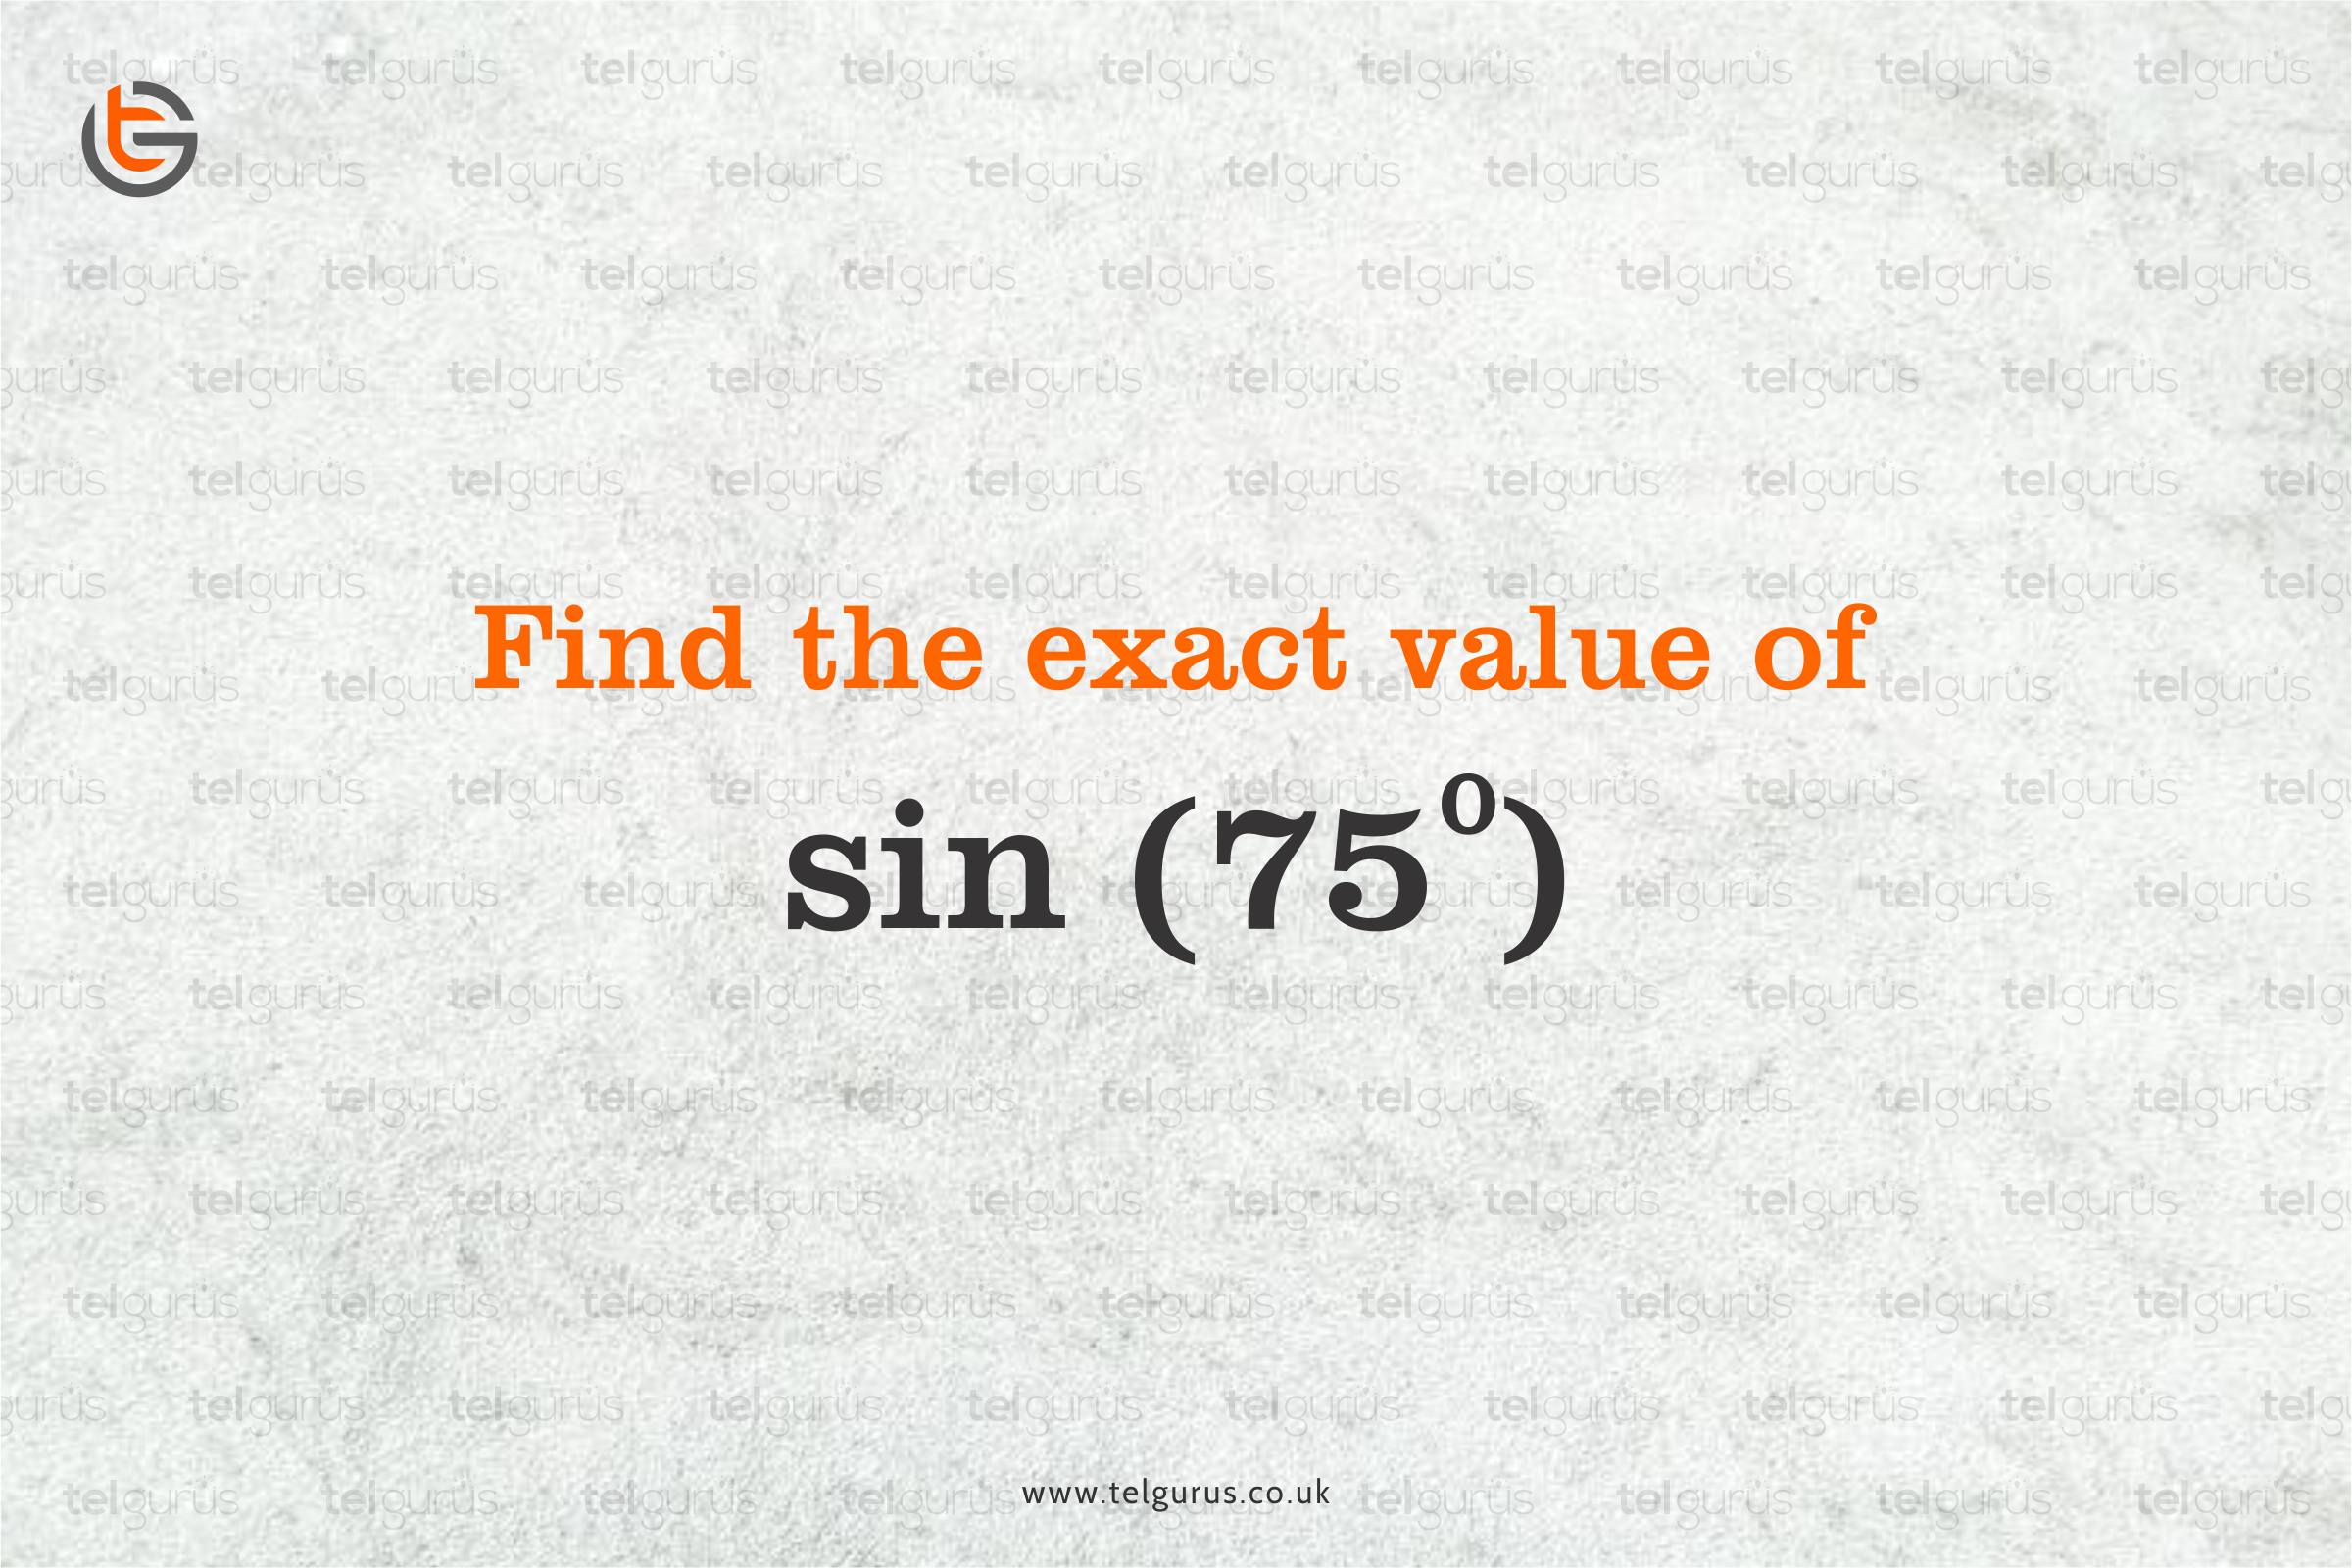 Find the exact value of sin (75°). Give your answer in its simplest form.